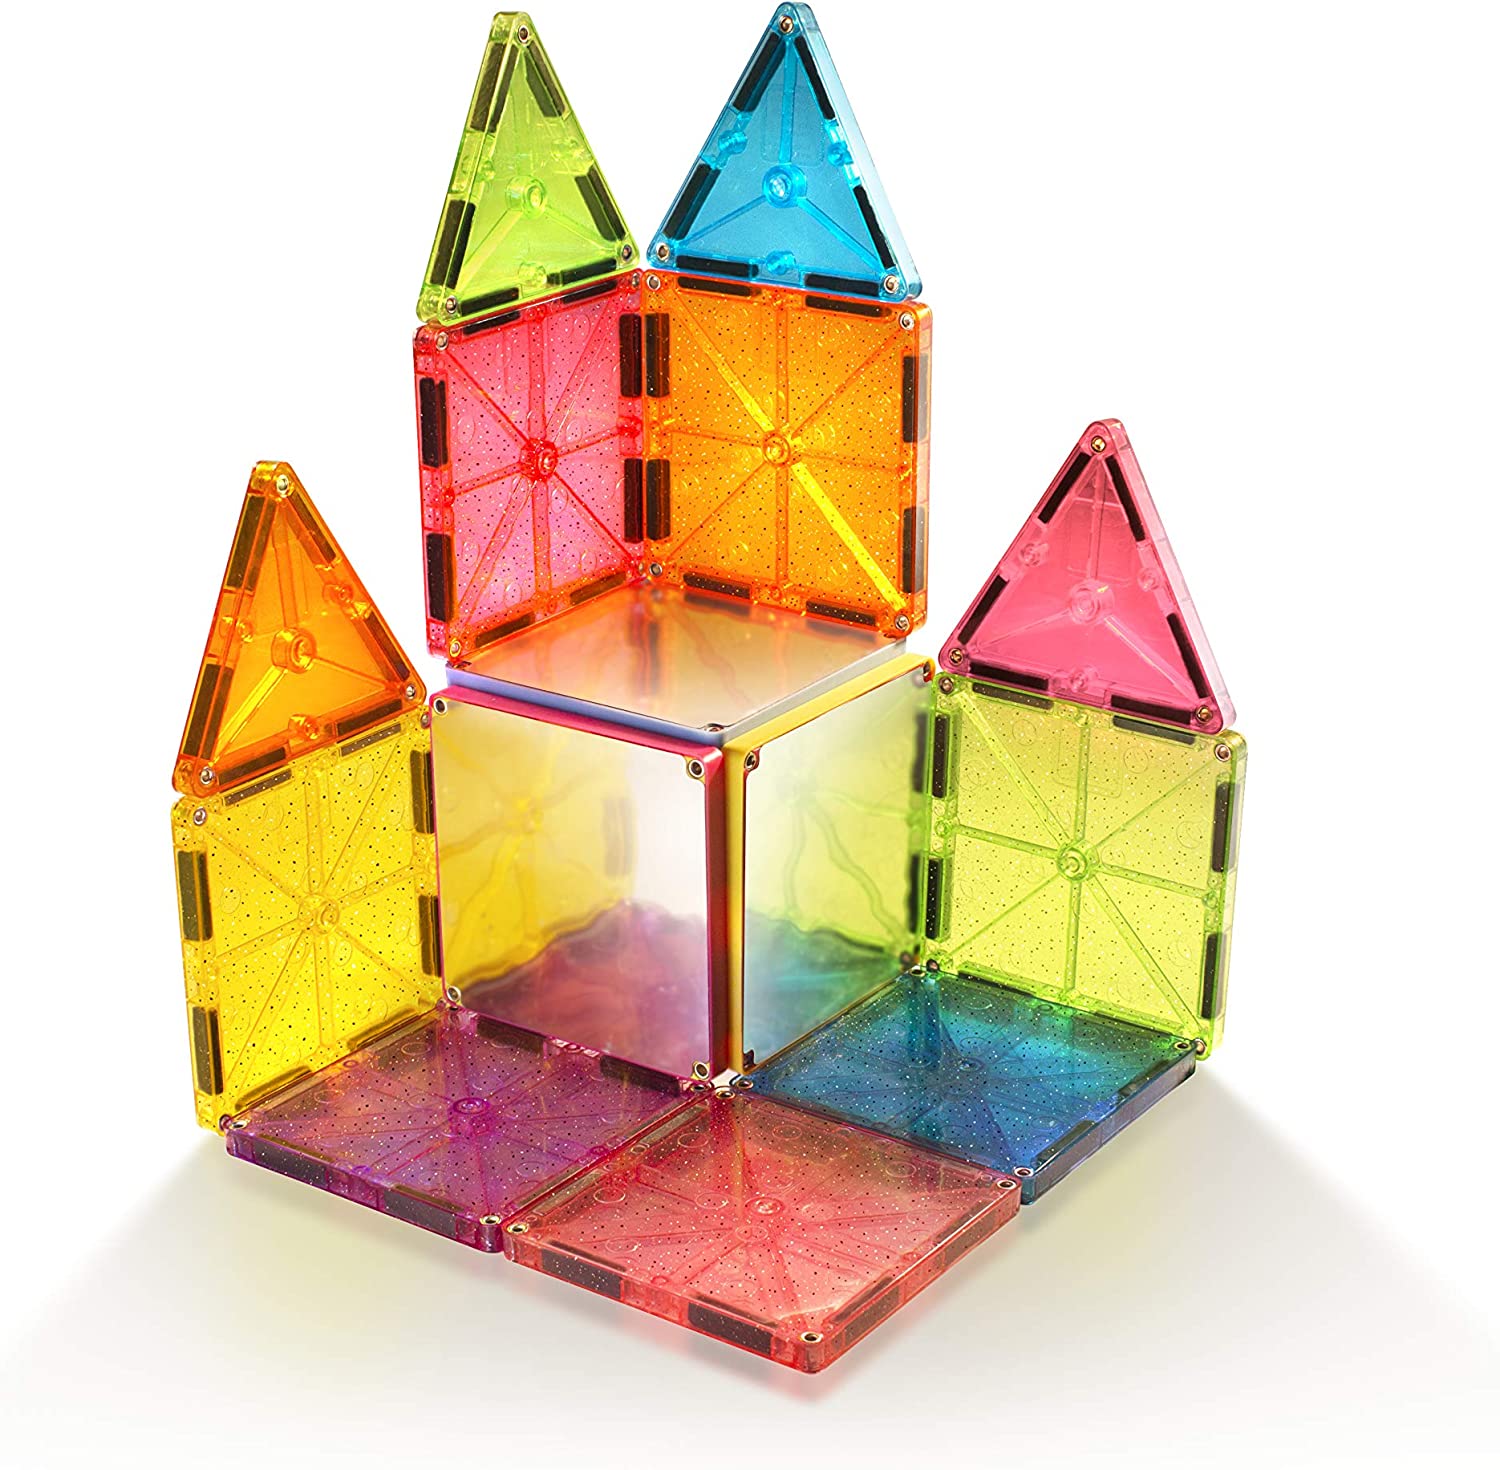 Magna Tiles Clear Colors 48Pc Set – Kidding Around NYC